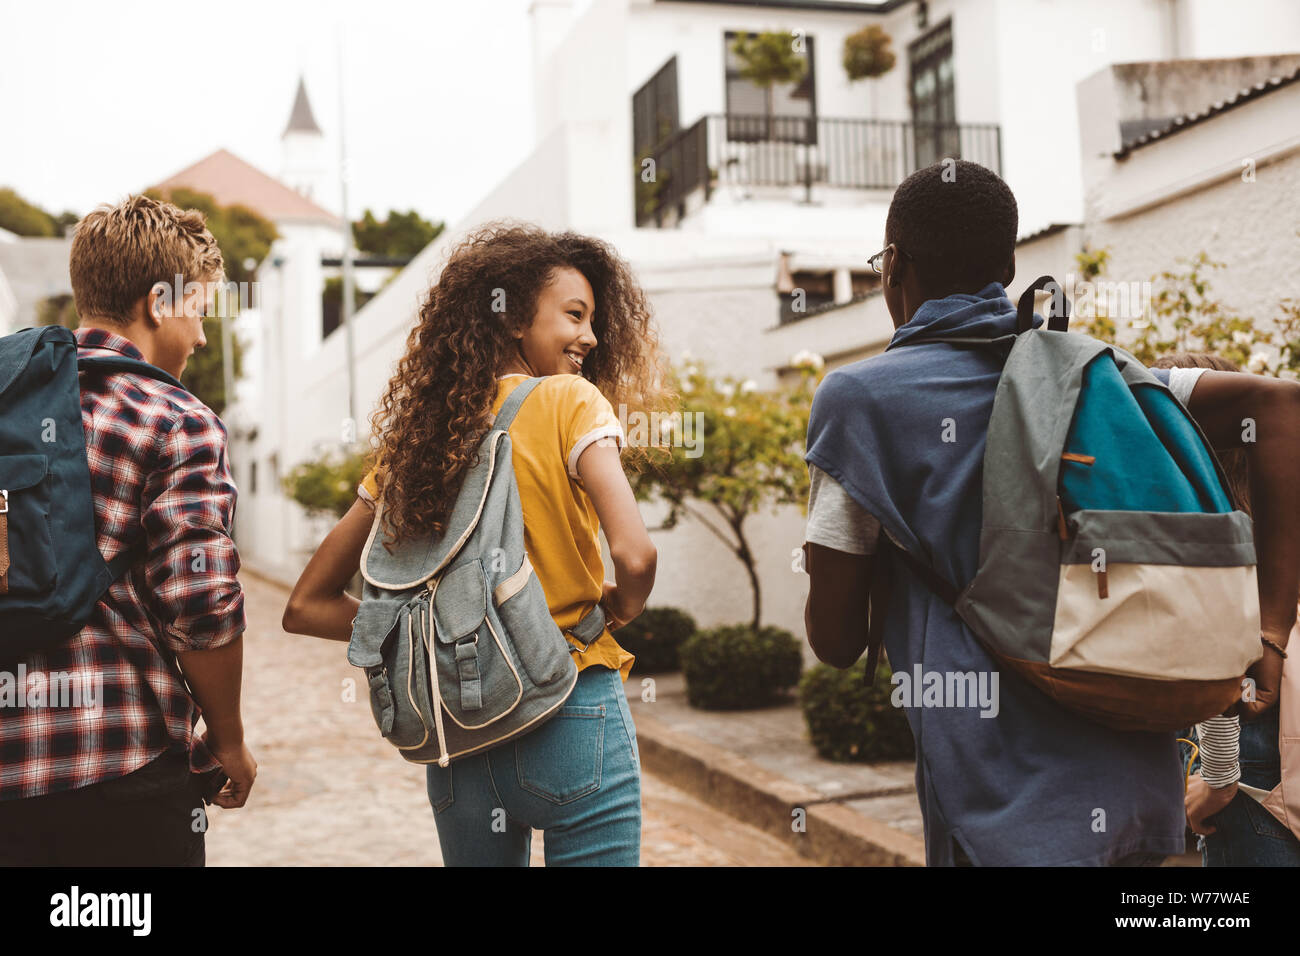 Rear view of teenage friends walking together in the street. Smiling teenage girl walking with friends wearing college bag. Stock Photo